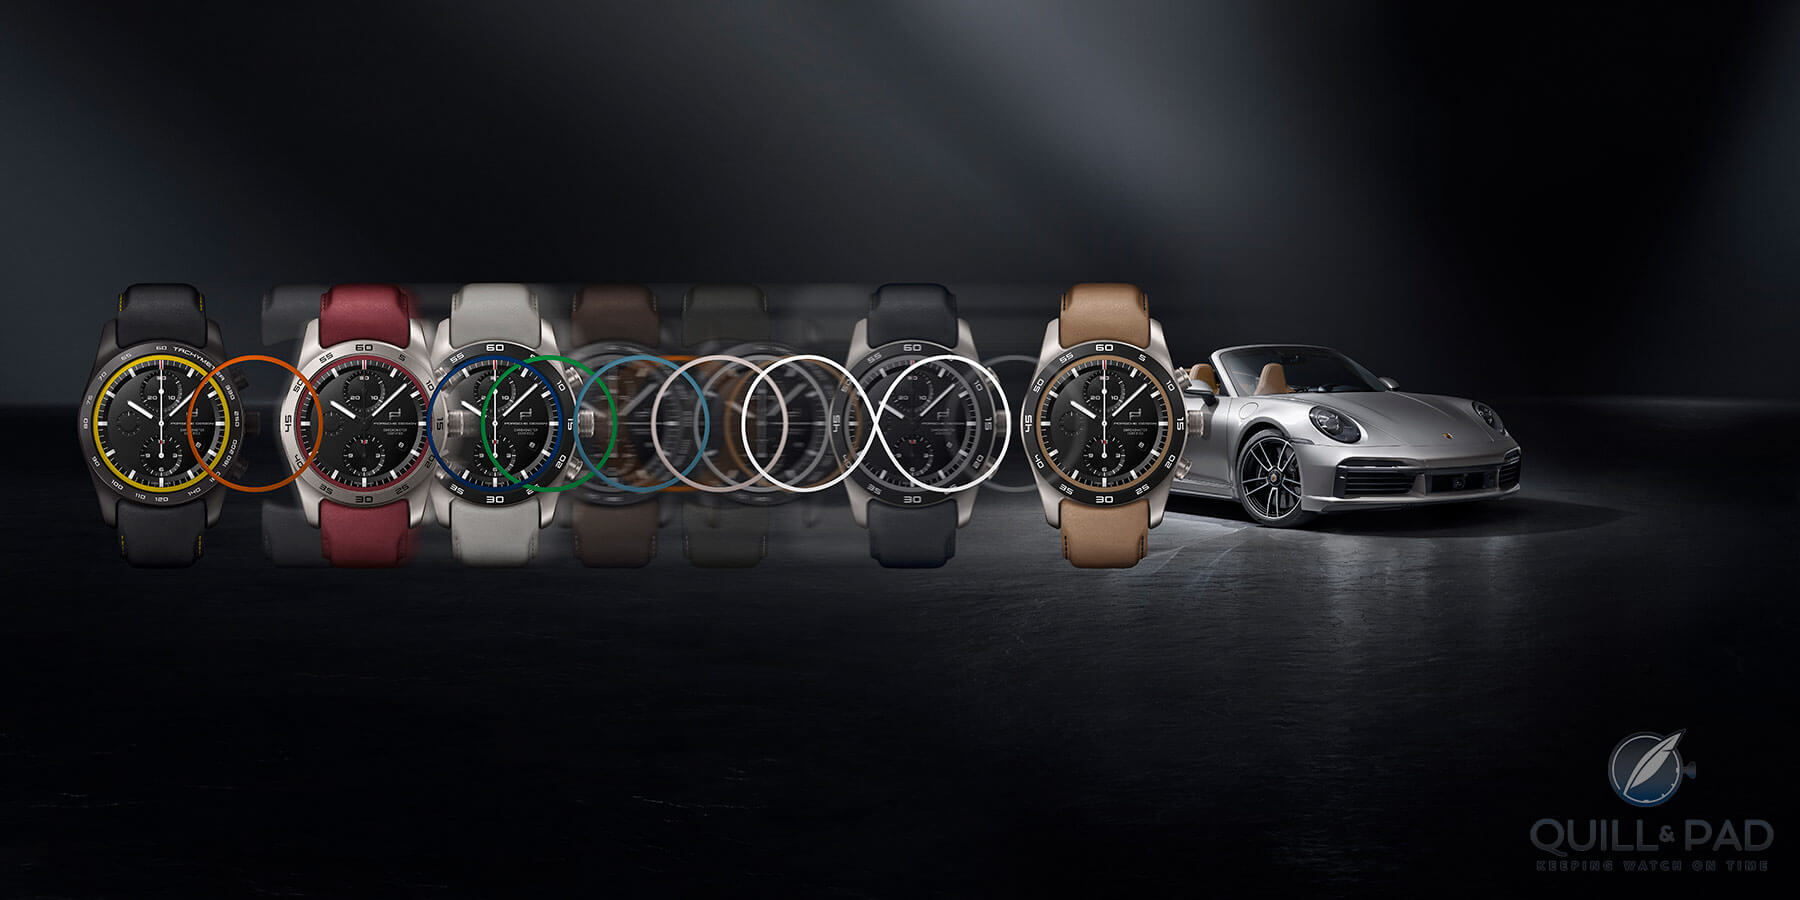 Custom Built Timepieces By Porsche Design Revving Up To Your Own Dream Watch Quill Pad